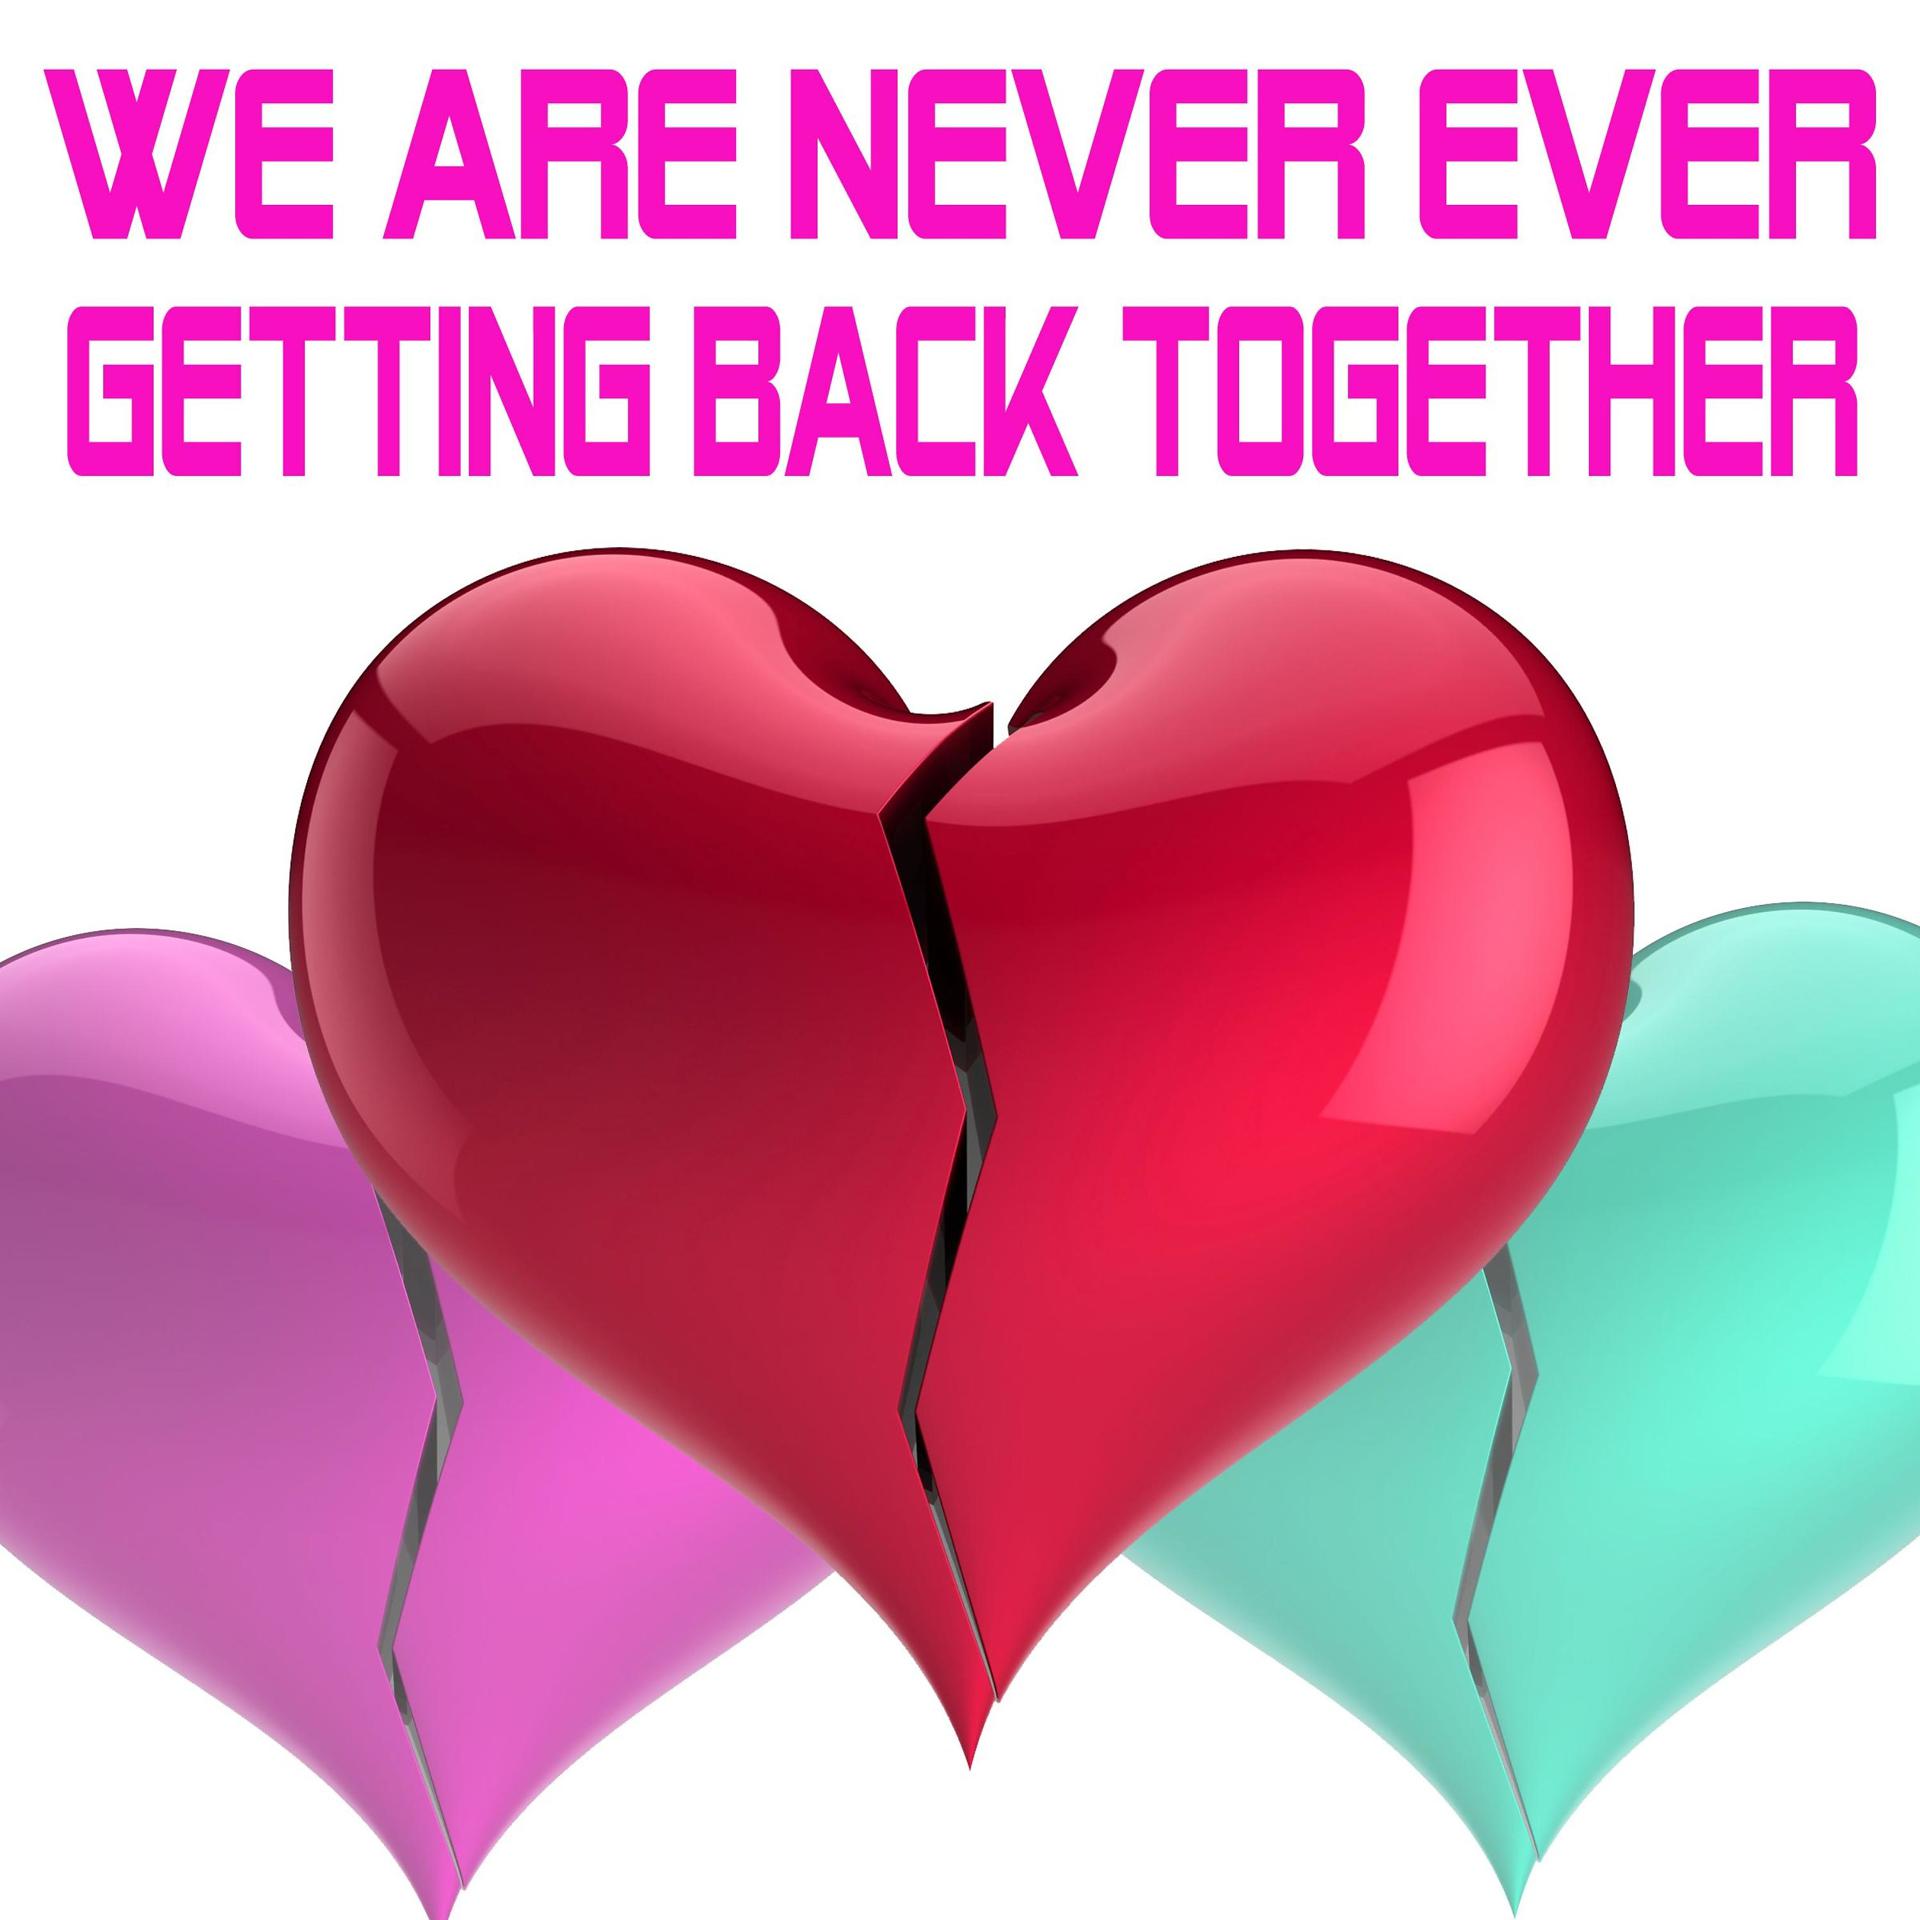 Get back together. We are together. We are together картинка. We are never ever getting back together. Back together! Картинки.